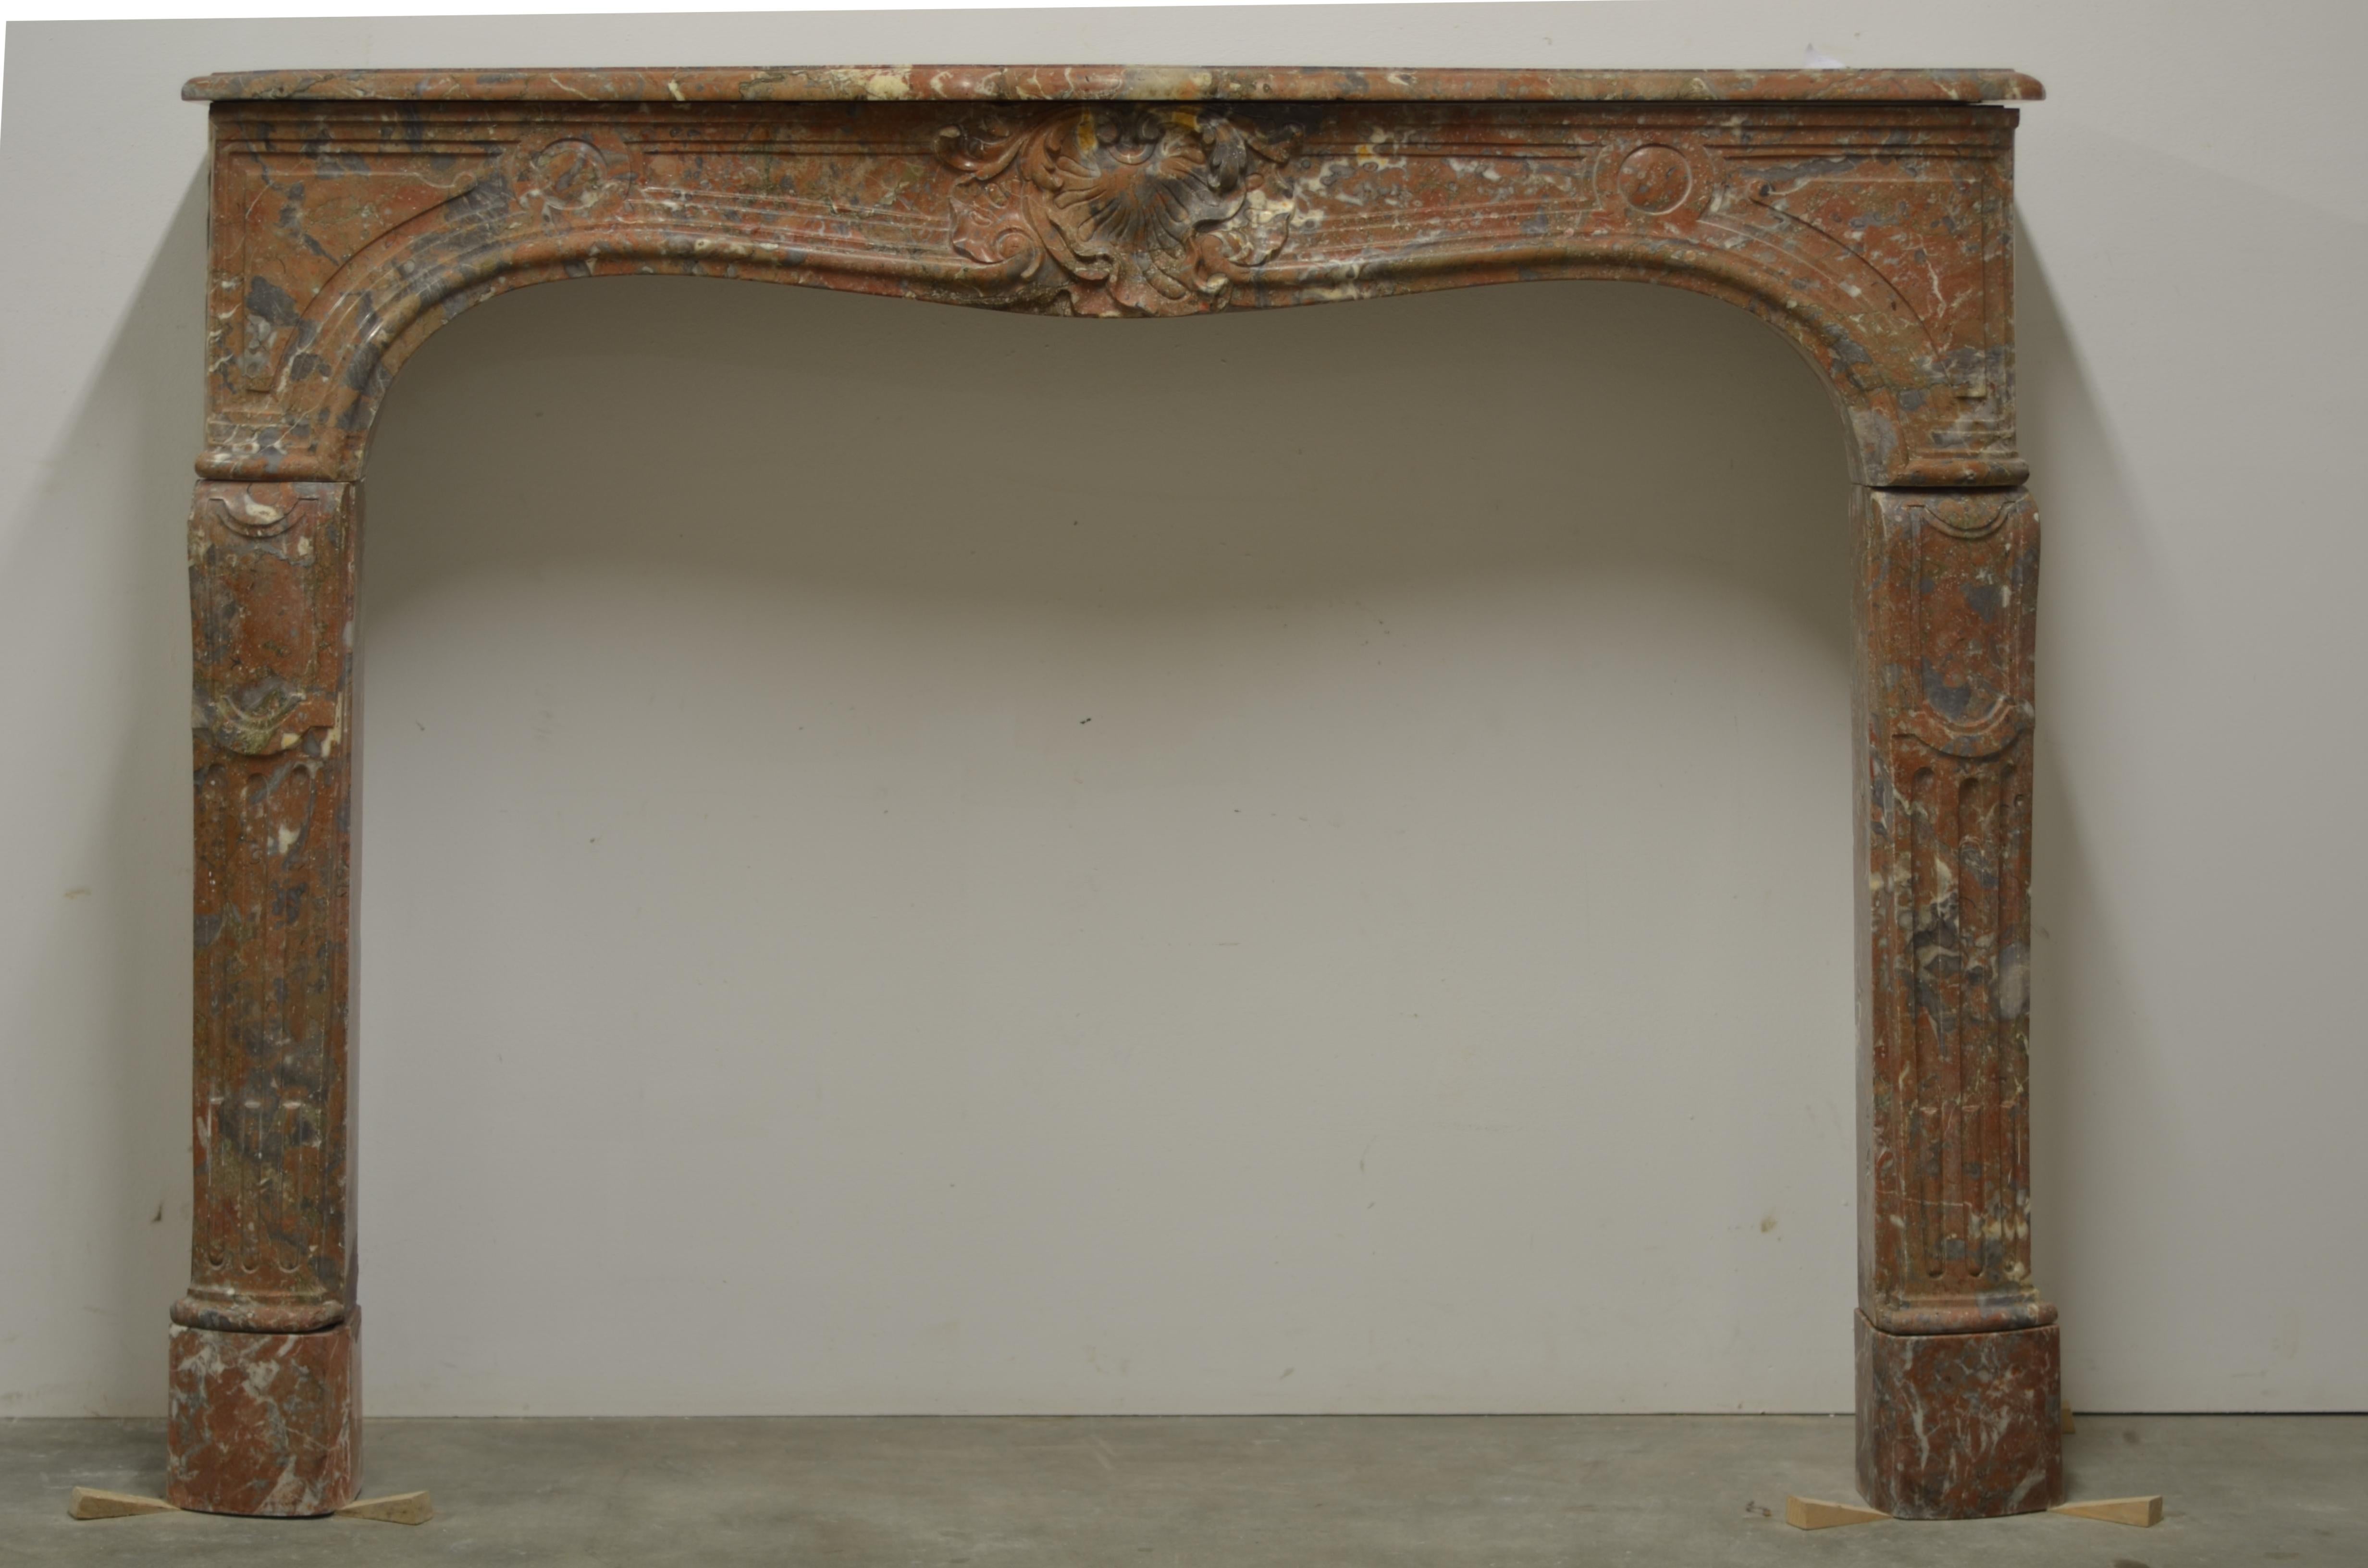 Amazing 18th century French Louis XV fireplace mantel.
This stylish mantelpiece is made from soft and subtle toned red marble wit nice and warm color variations.

The sides are not original but match nicely.
Great decorative and period